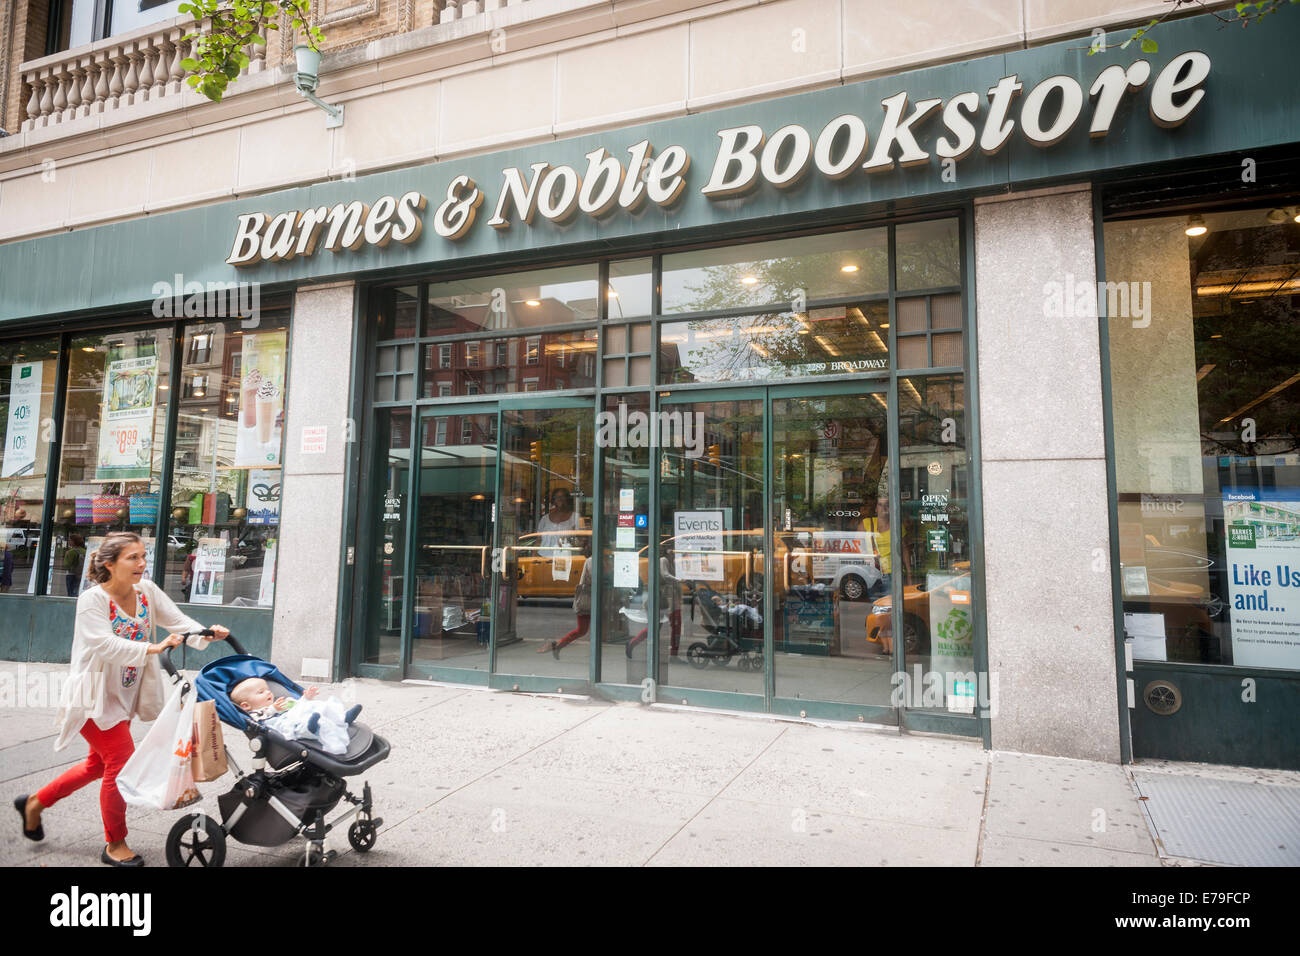 A Barnes Noble Bookstore In The Upper West Side Neighborhood Of New York Stock Photo Alamy